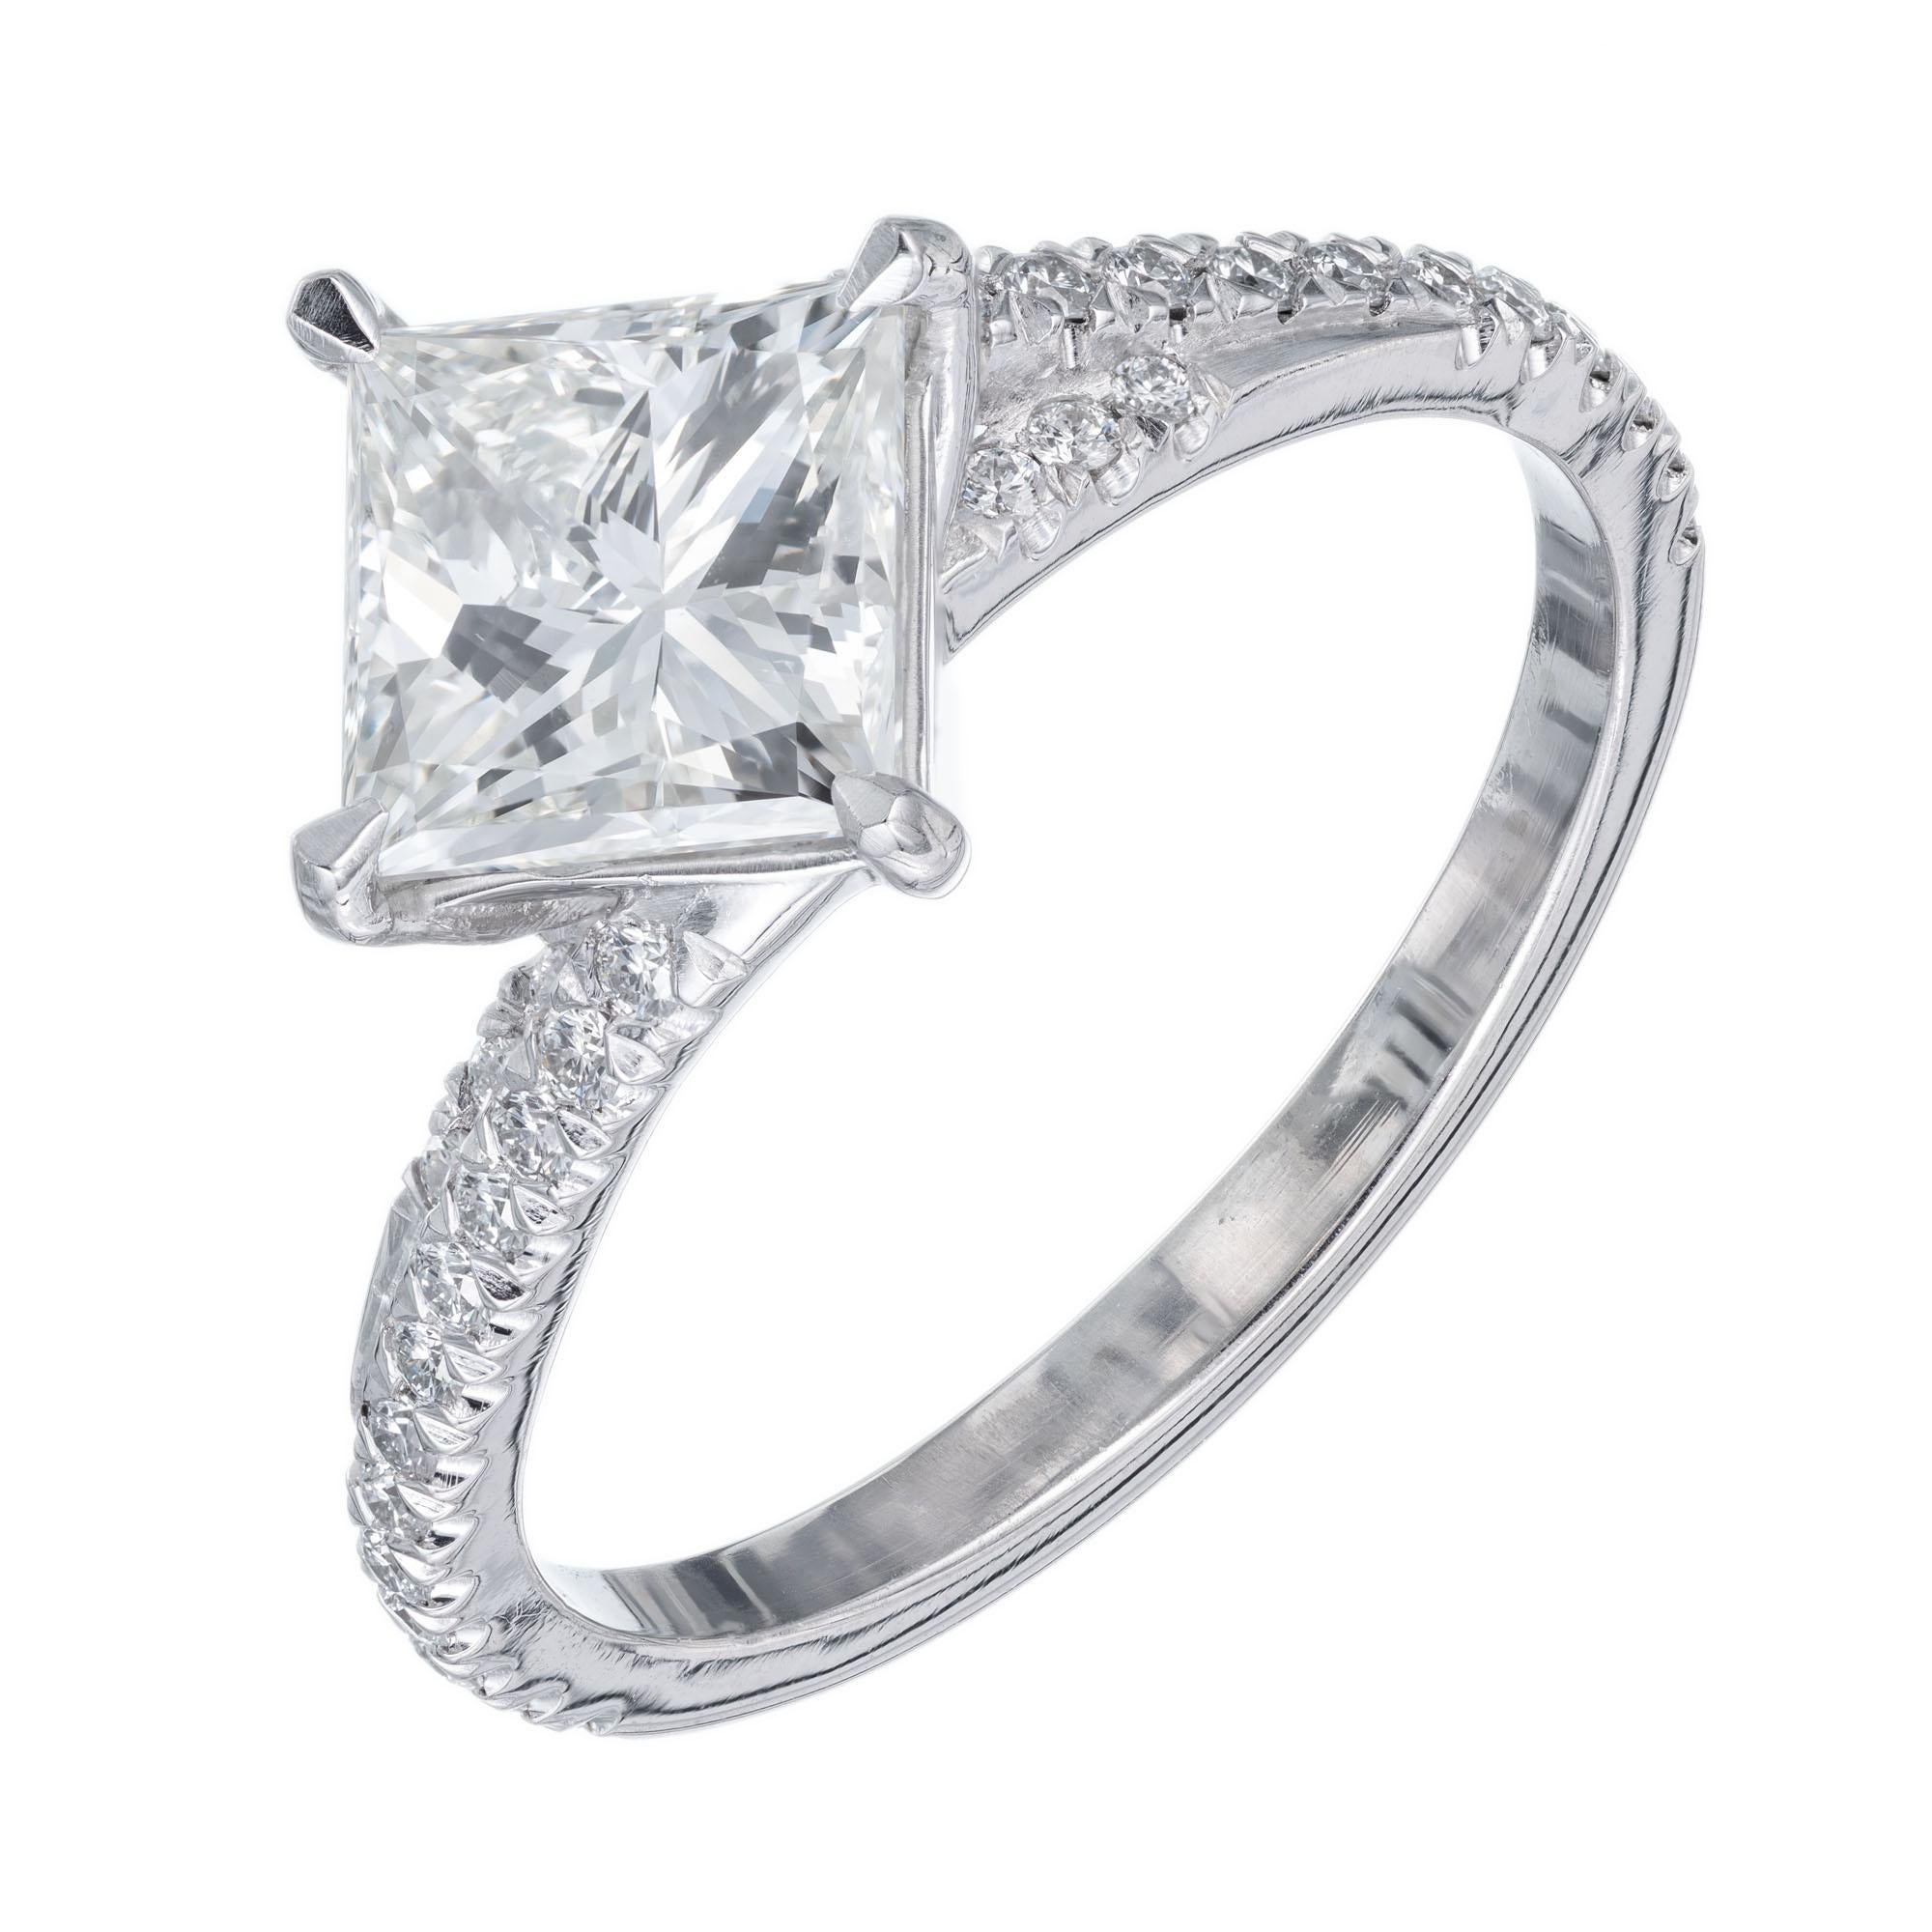 GIA certified Peter Suchy princess cut diamond 1.51 carat alternative twist style platinum engagement ring. Princess cut center stone with 32 round accent diamonds in a platinum setting created by the Peter Suchy Workshop. 

1 princess cut diamond J